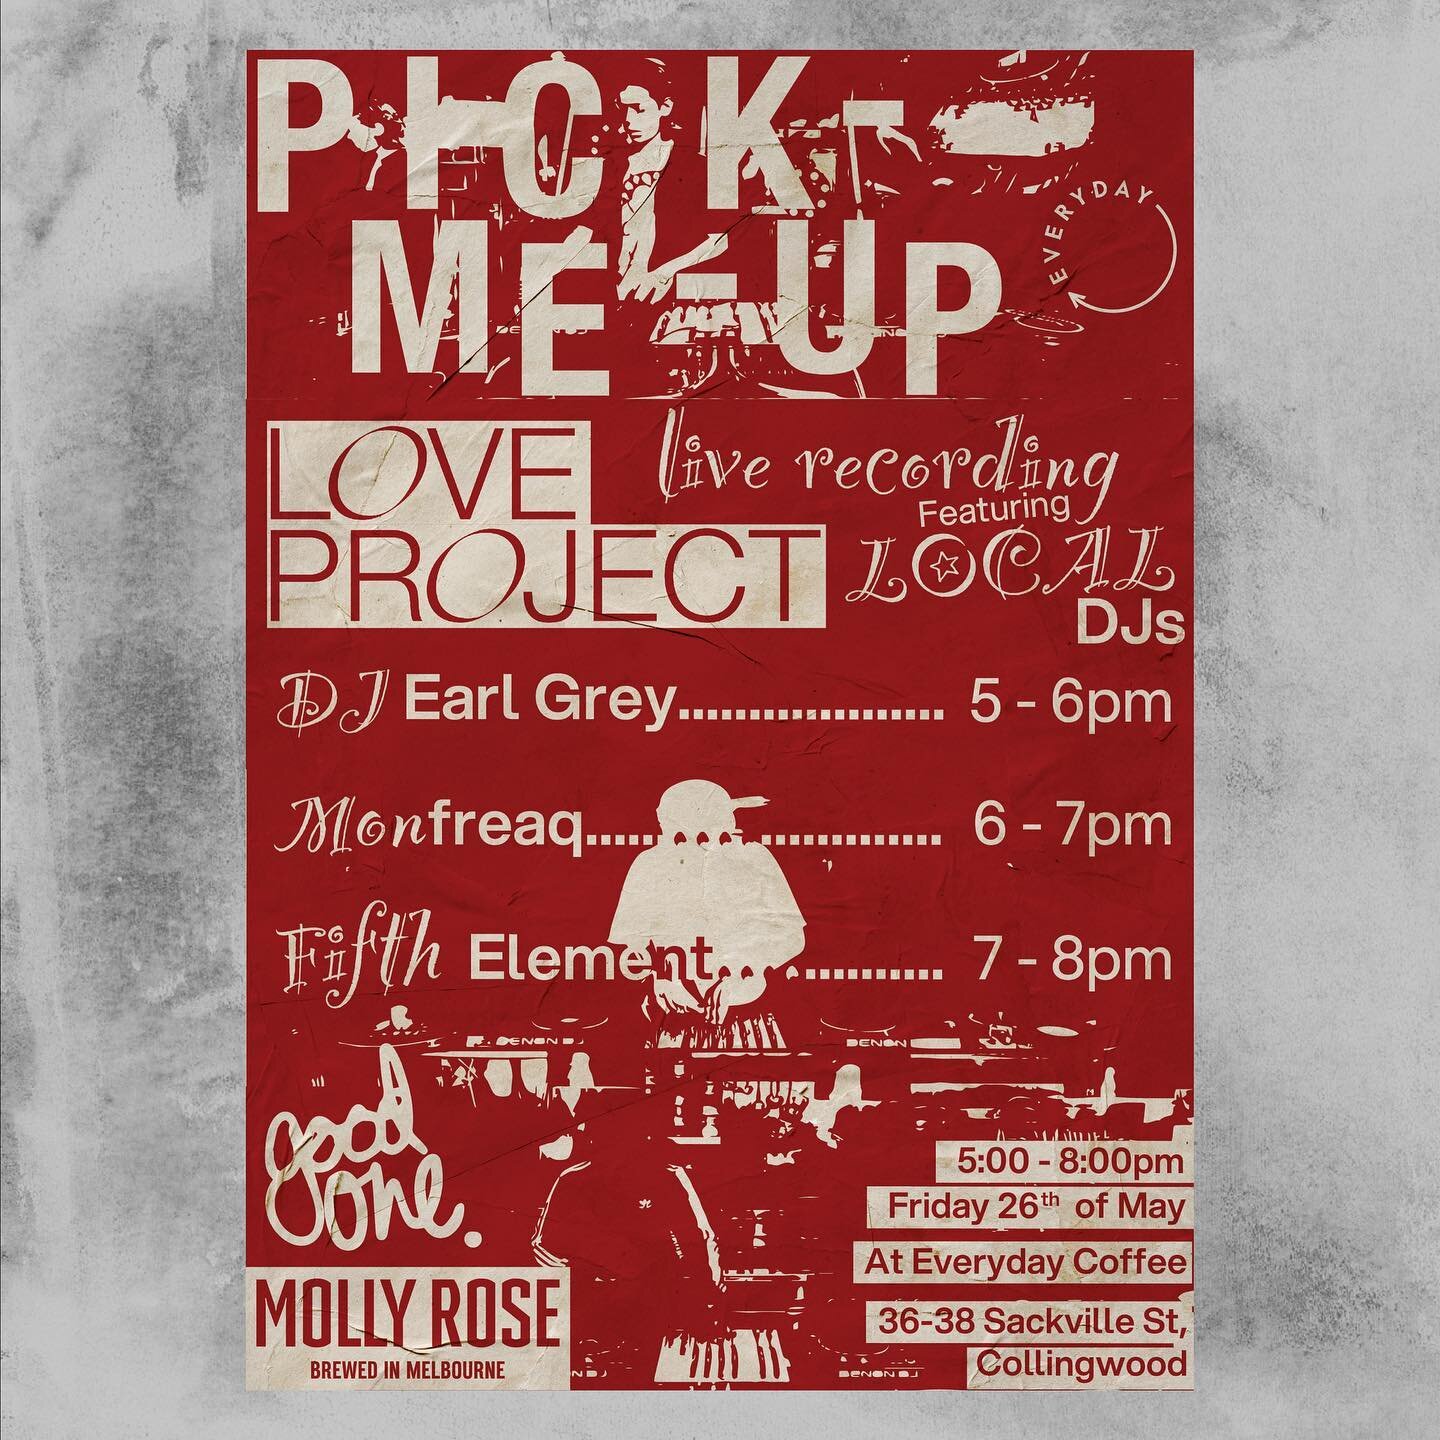 MAG LAUNCH: FRIDAY 26TH MAY! 5-8pm at @everydaycoffee

PICK-ME-UP 02 magazine is about local CREATIVITY, INITIATIVE and ENTERPRISE. 

To launch, we&rsquo;ve partnered with @loveprojectau ~ music and event curators committed to enriching music culture